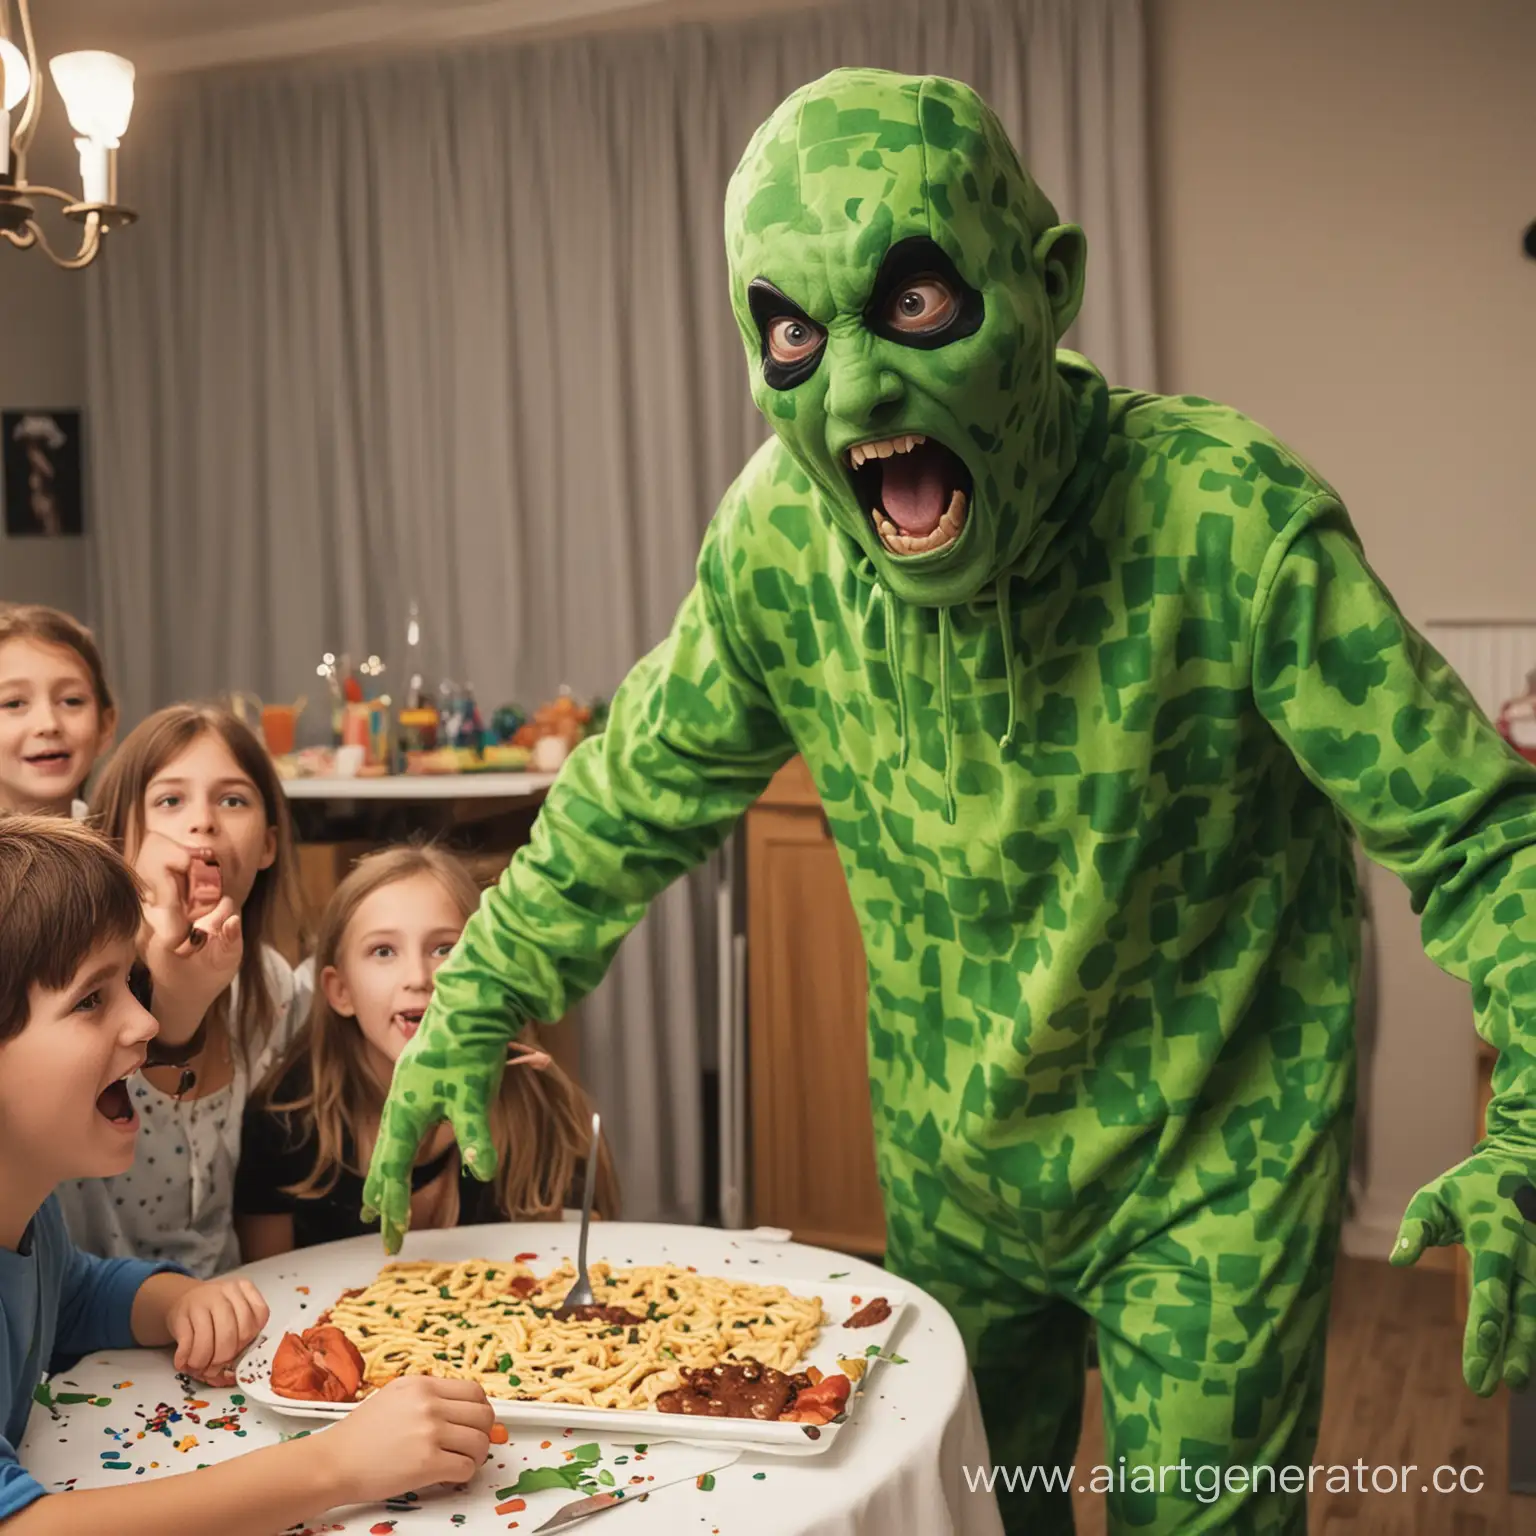 Creeper-Animator-Delights-Kids-with-Belch-at-Childrens-Party